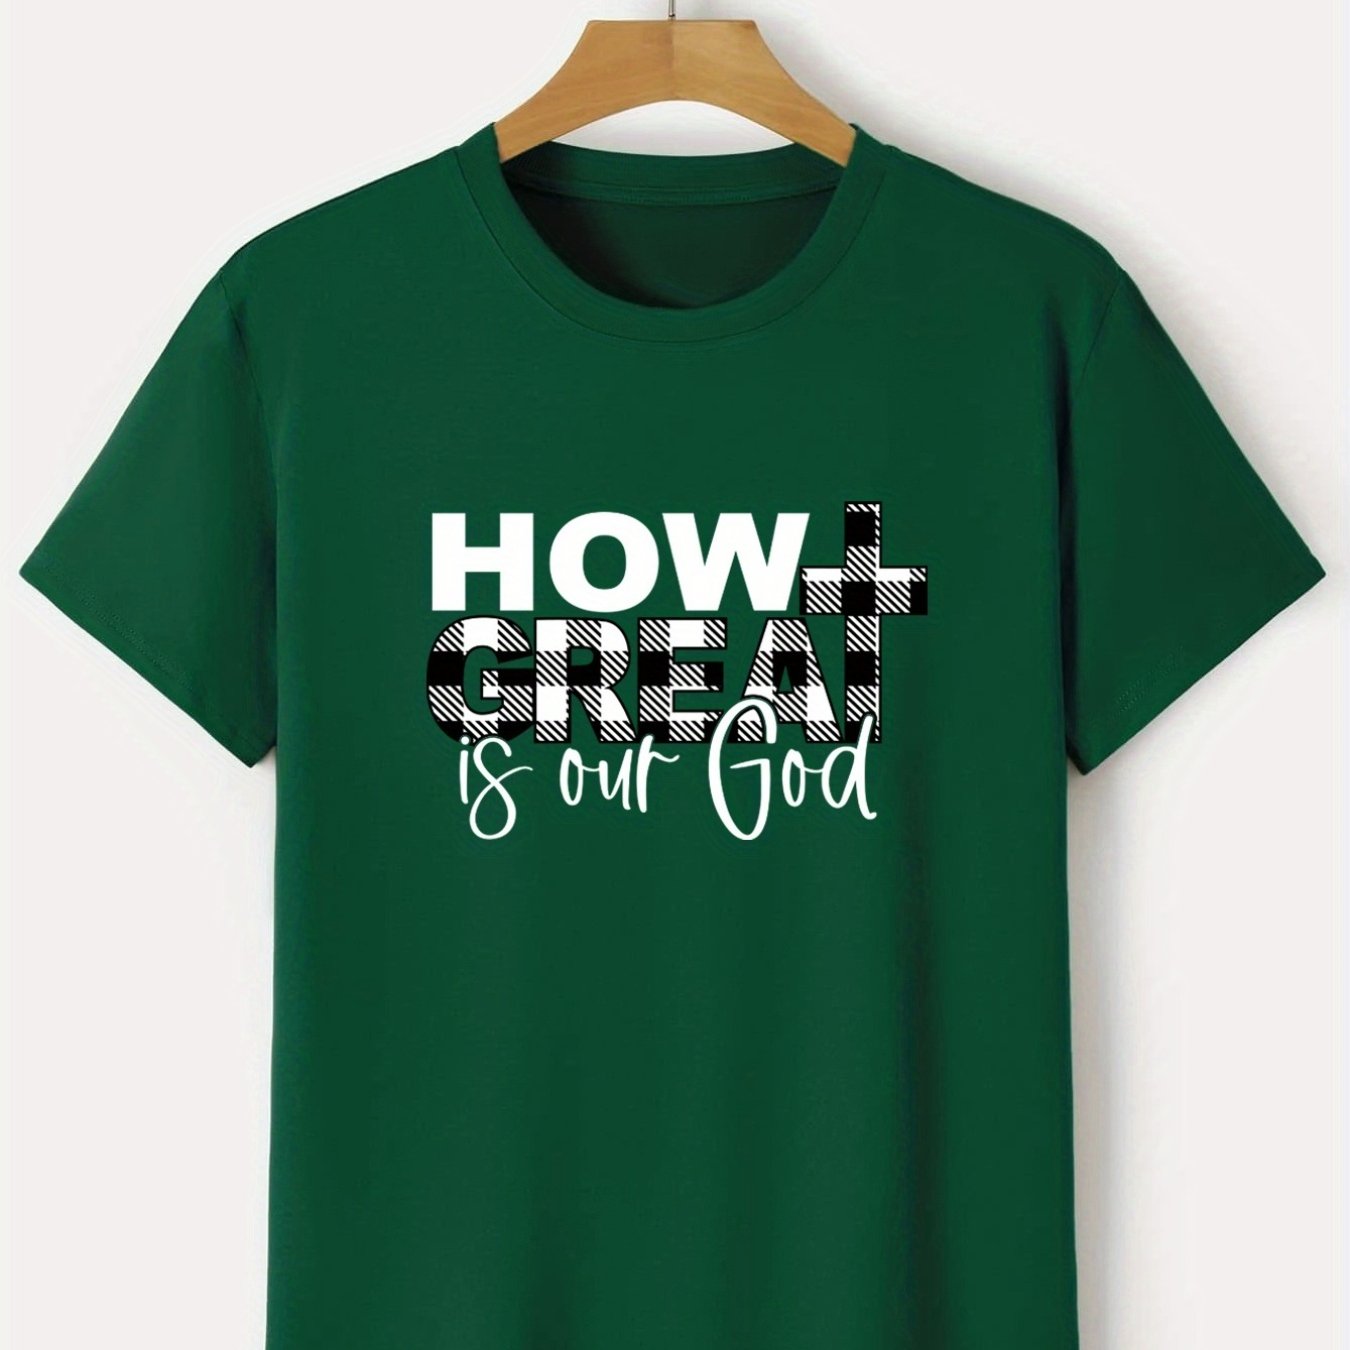 'How Great Is Our God Unisex Christian T-shirt claimedbygoddesigns